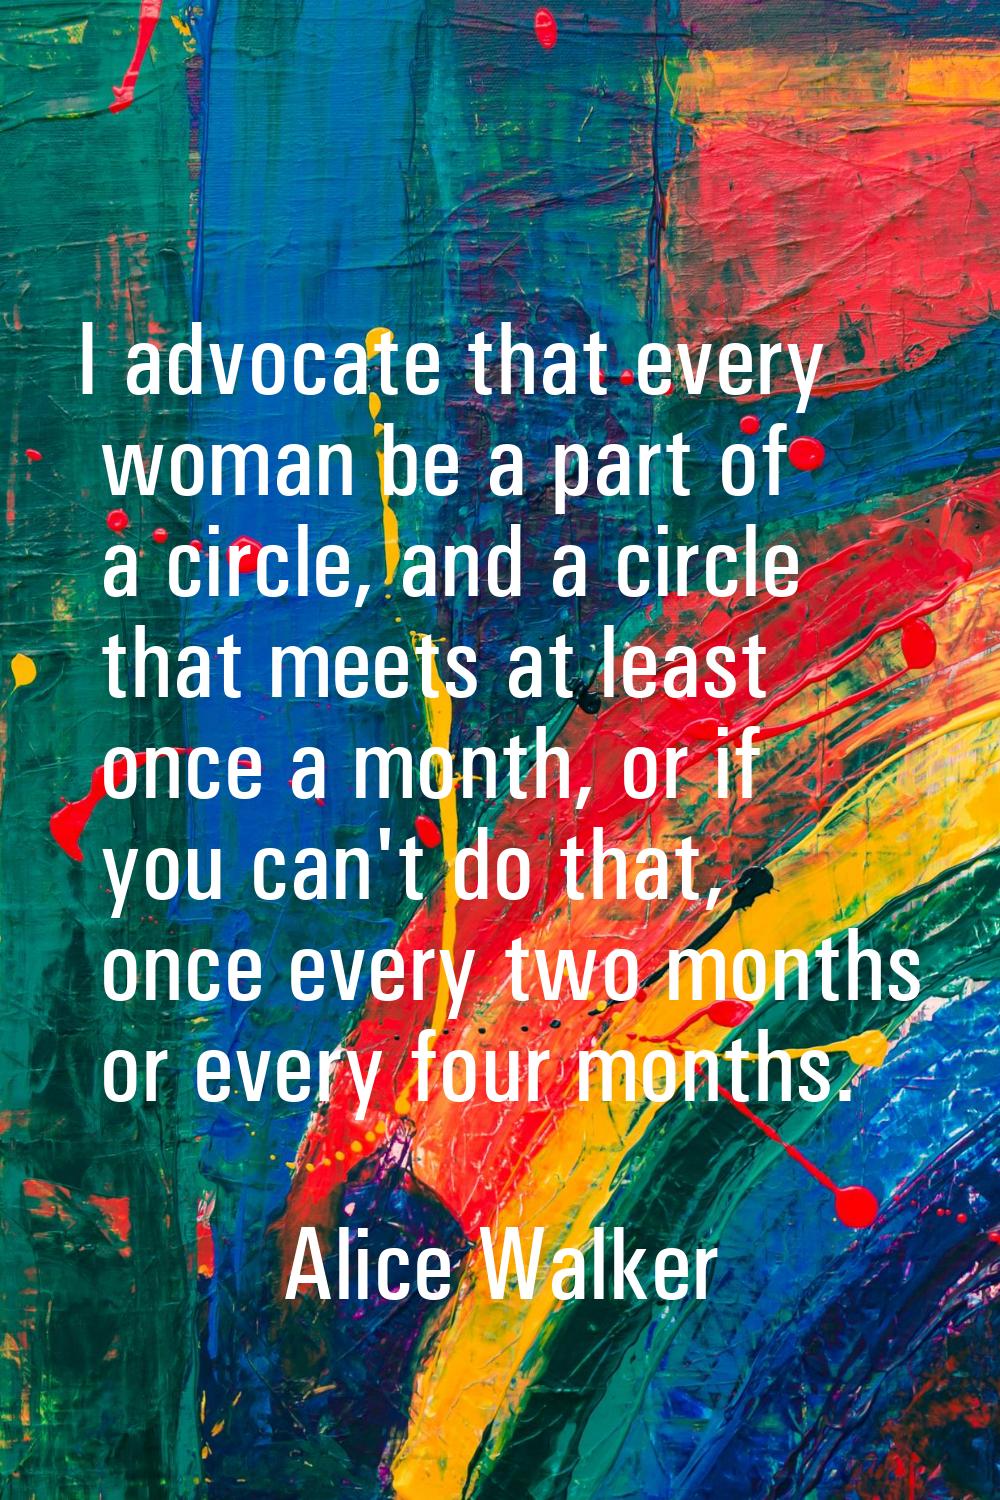 I advocate that every woman be a part of a circle, and a circle that meets at least once a month, o